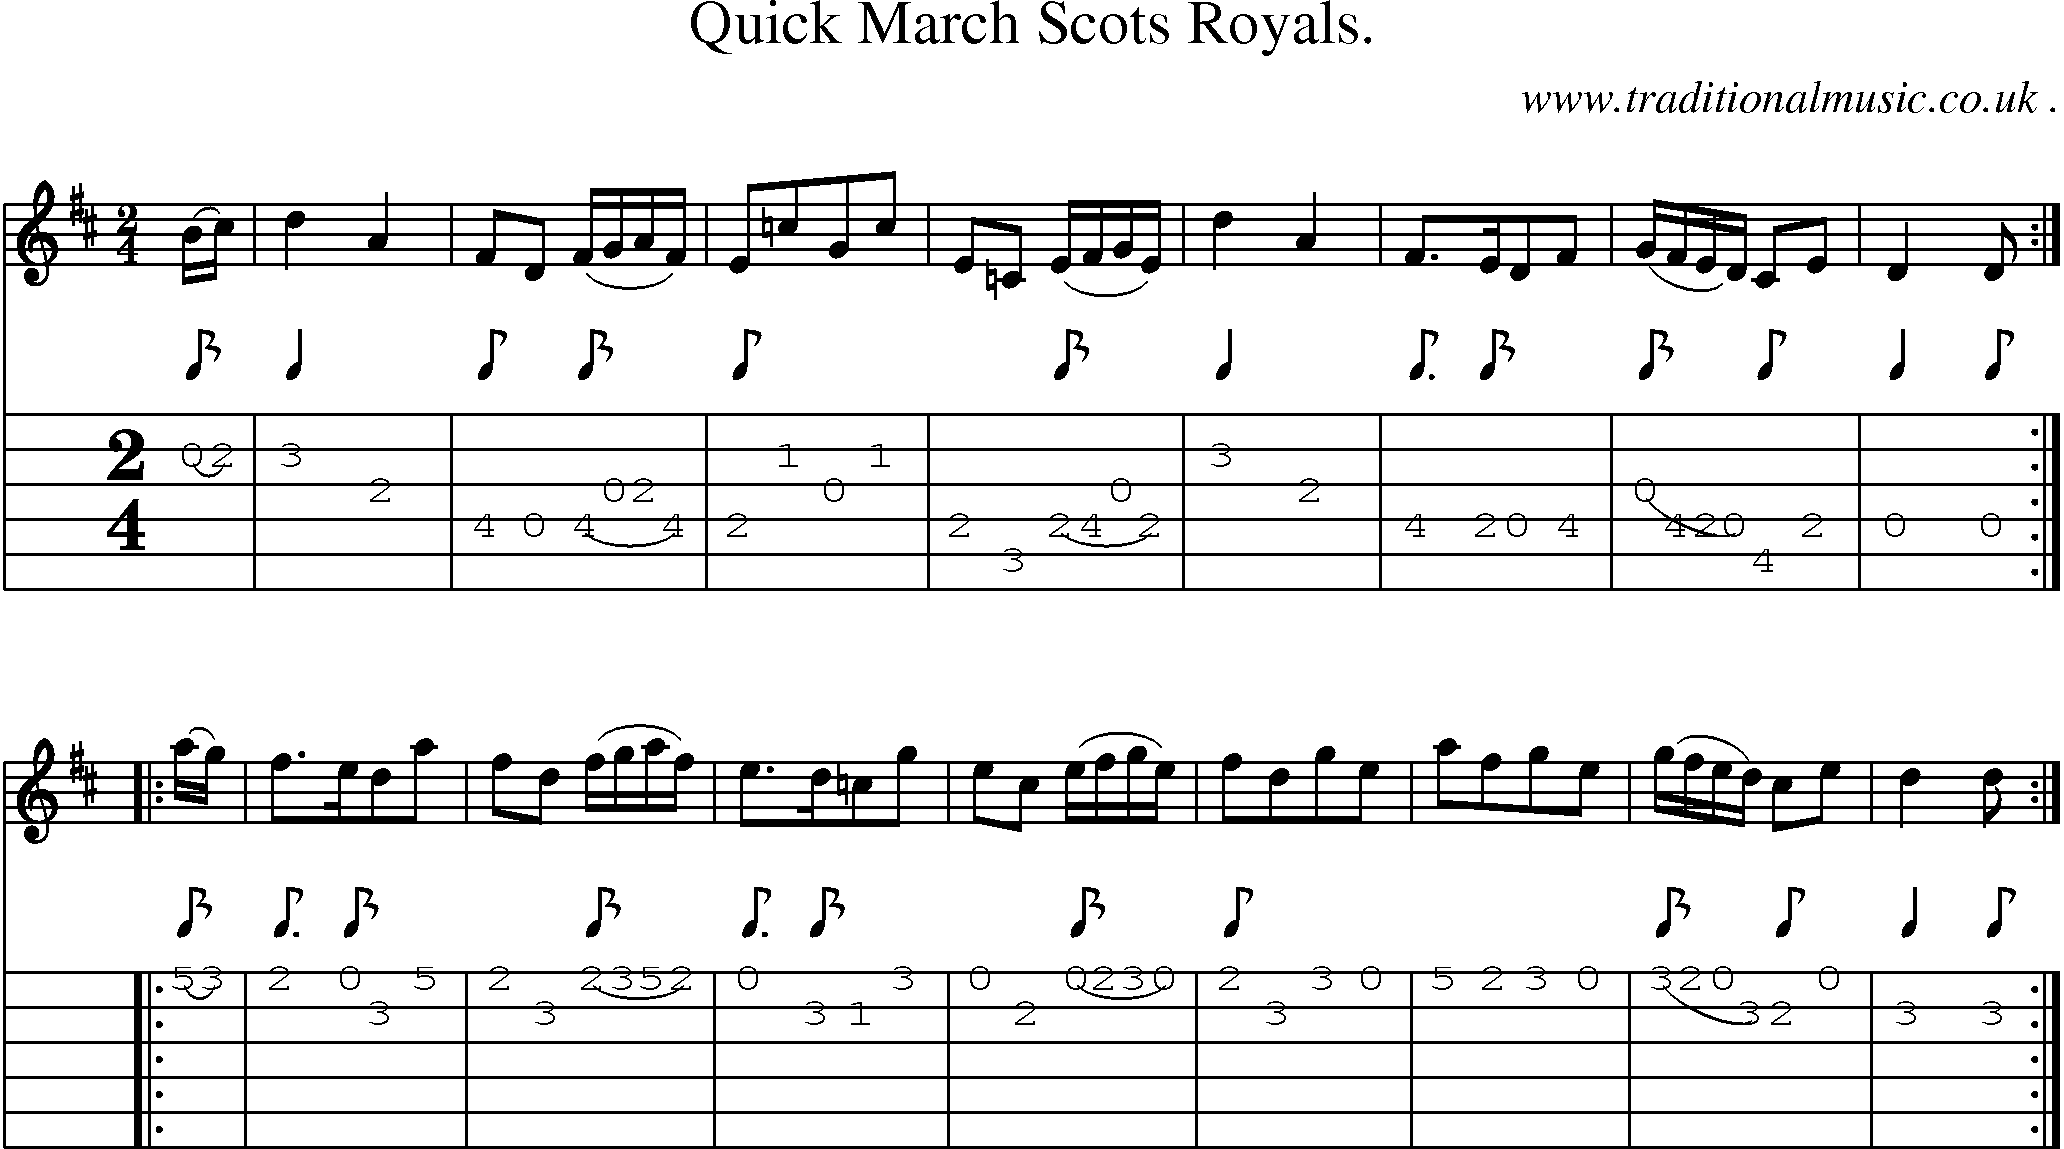 Sheet-music  score, Chords and Guitar Tabs for Quick March Scots Royals